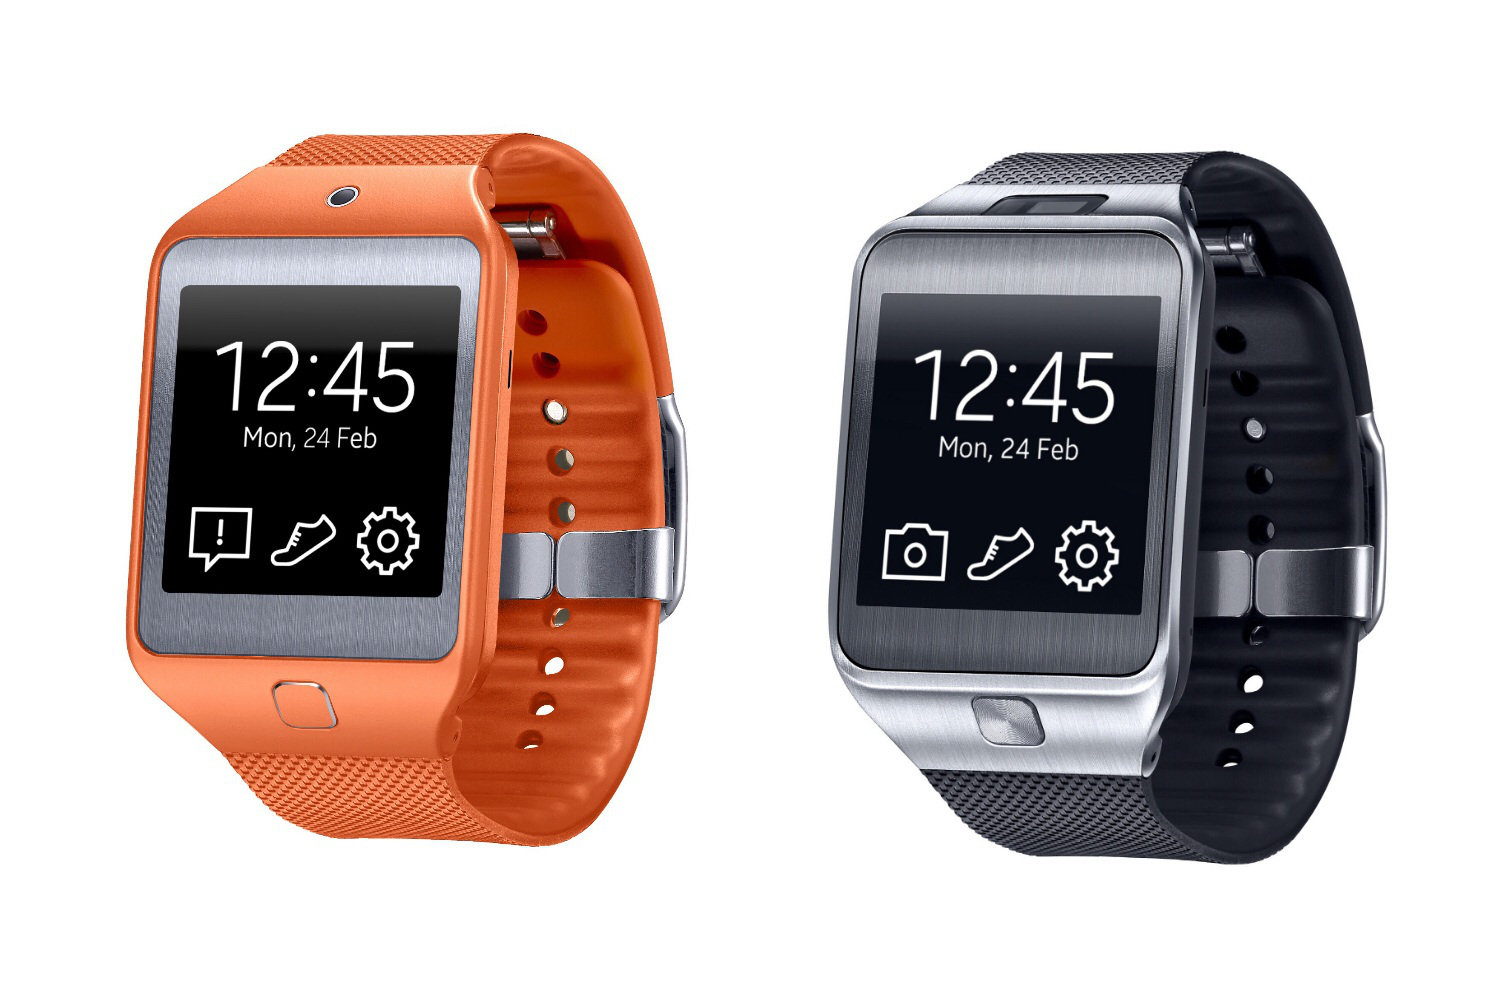 Smartwatches: Samsung's Galaxy Gear 2 Watch Drops Android for